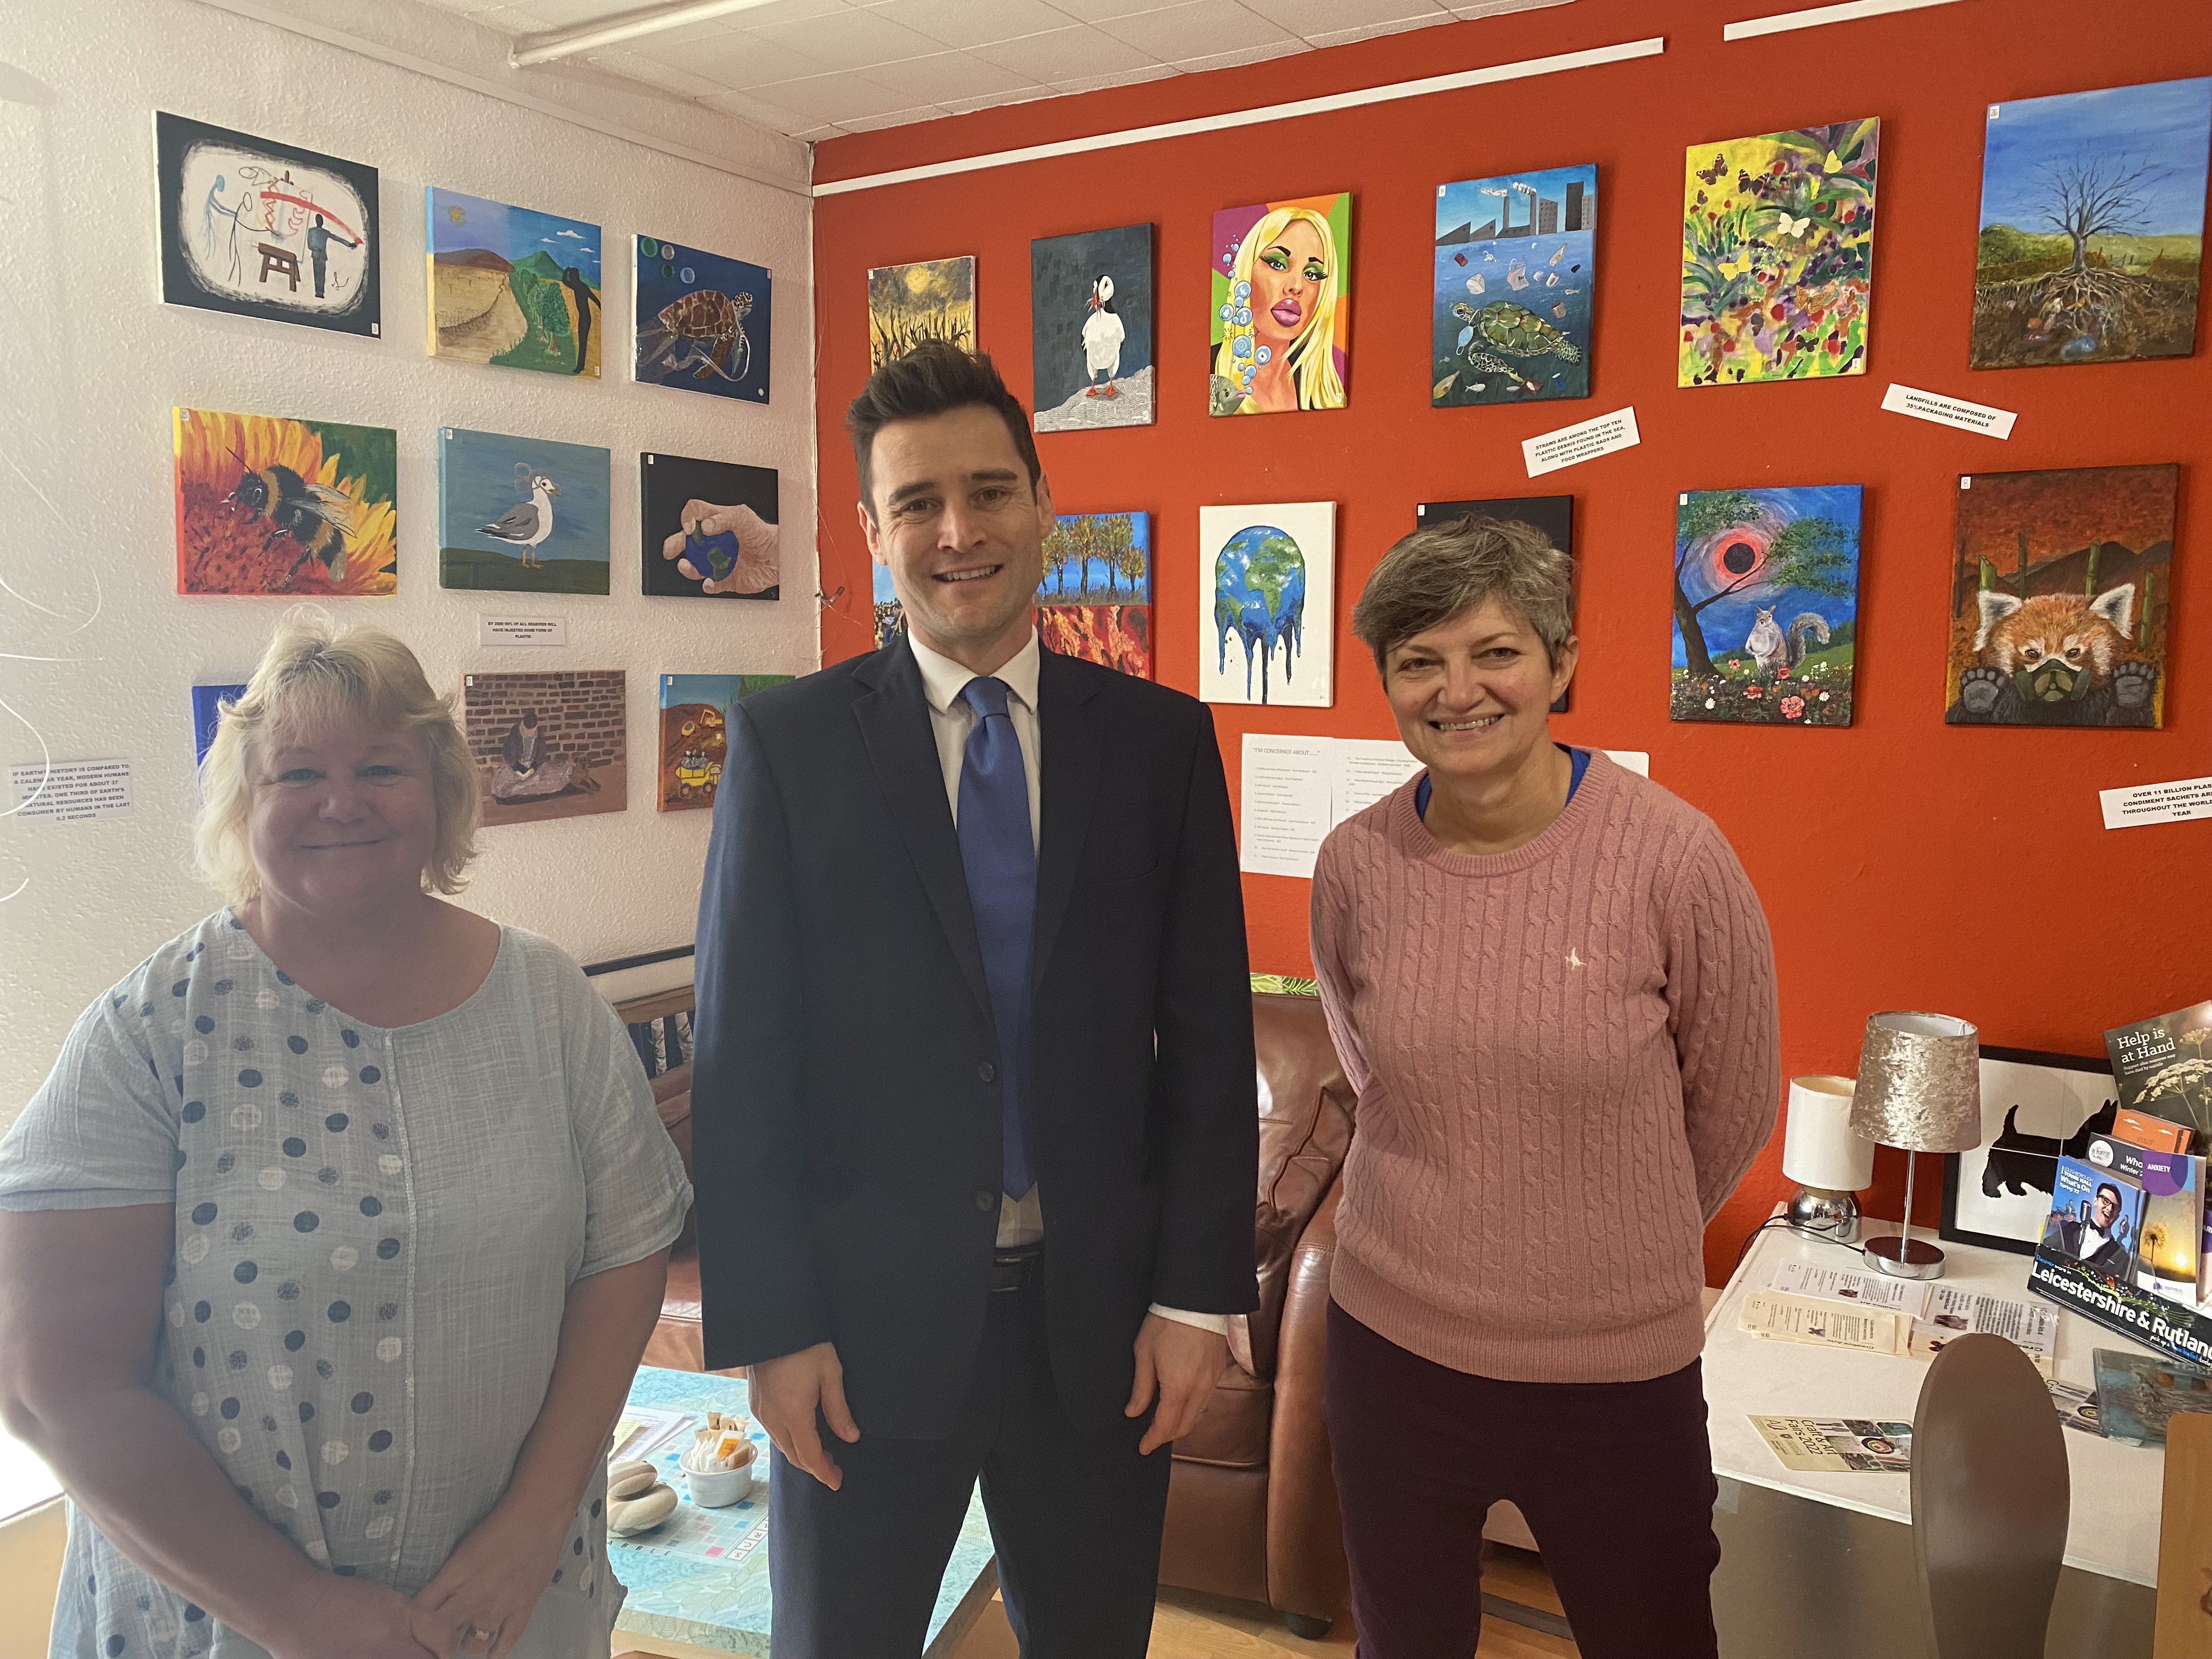 (L-R) Linda Flower, Dr Luke Evans MP and Rose Wilkinson in front of some of the paintings